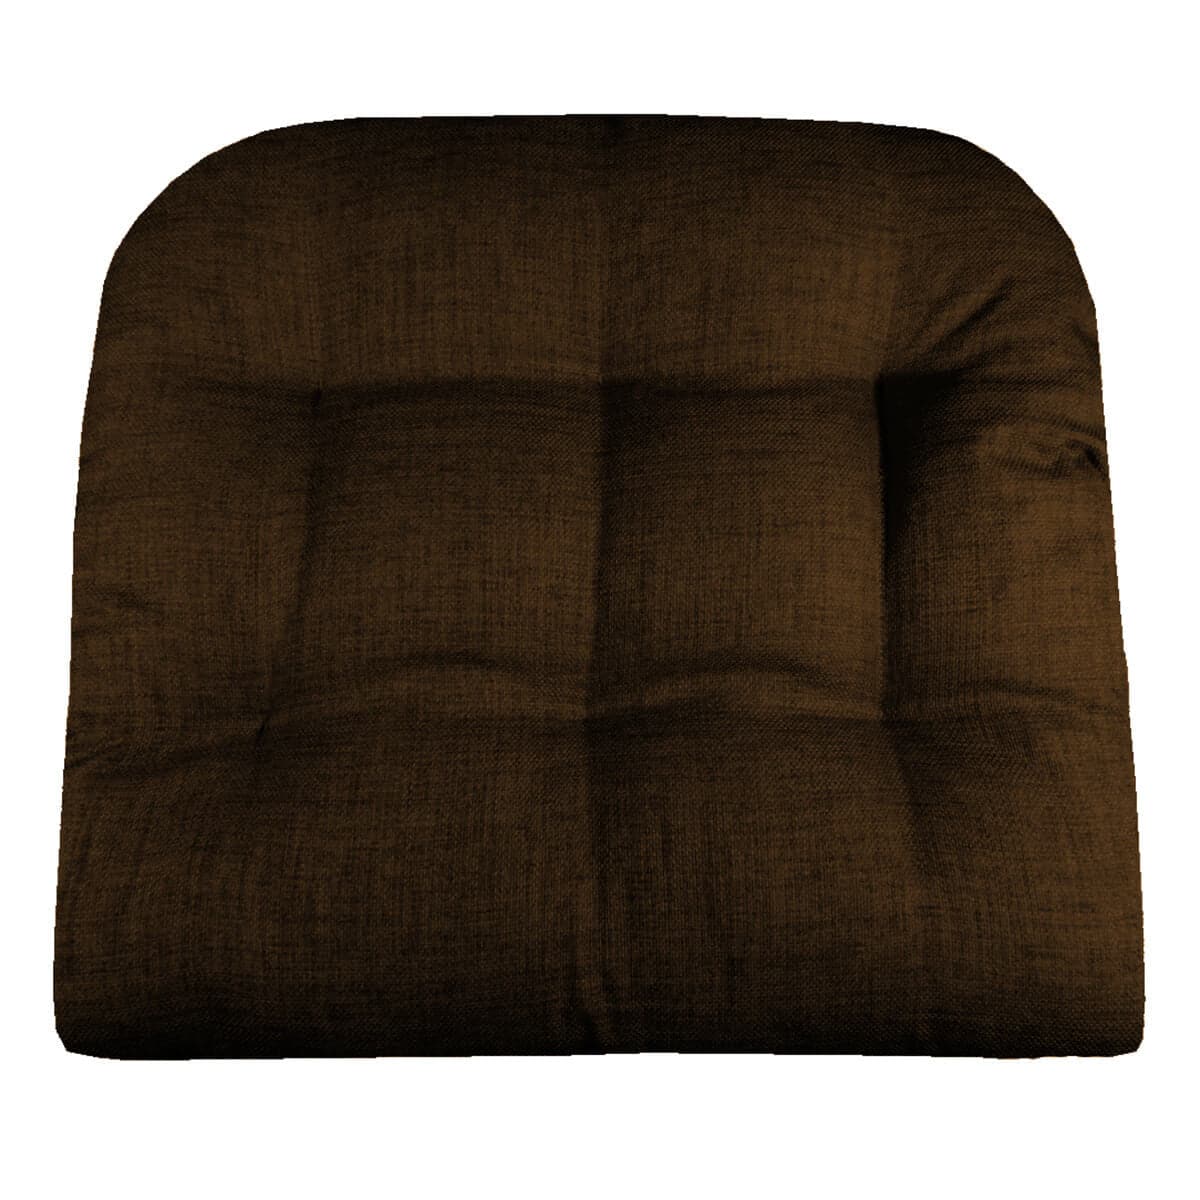 Rave Chocolate Brown Indoor/Outdoor Dining Chair Cushion - Barnett Home Decor -  Brown